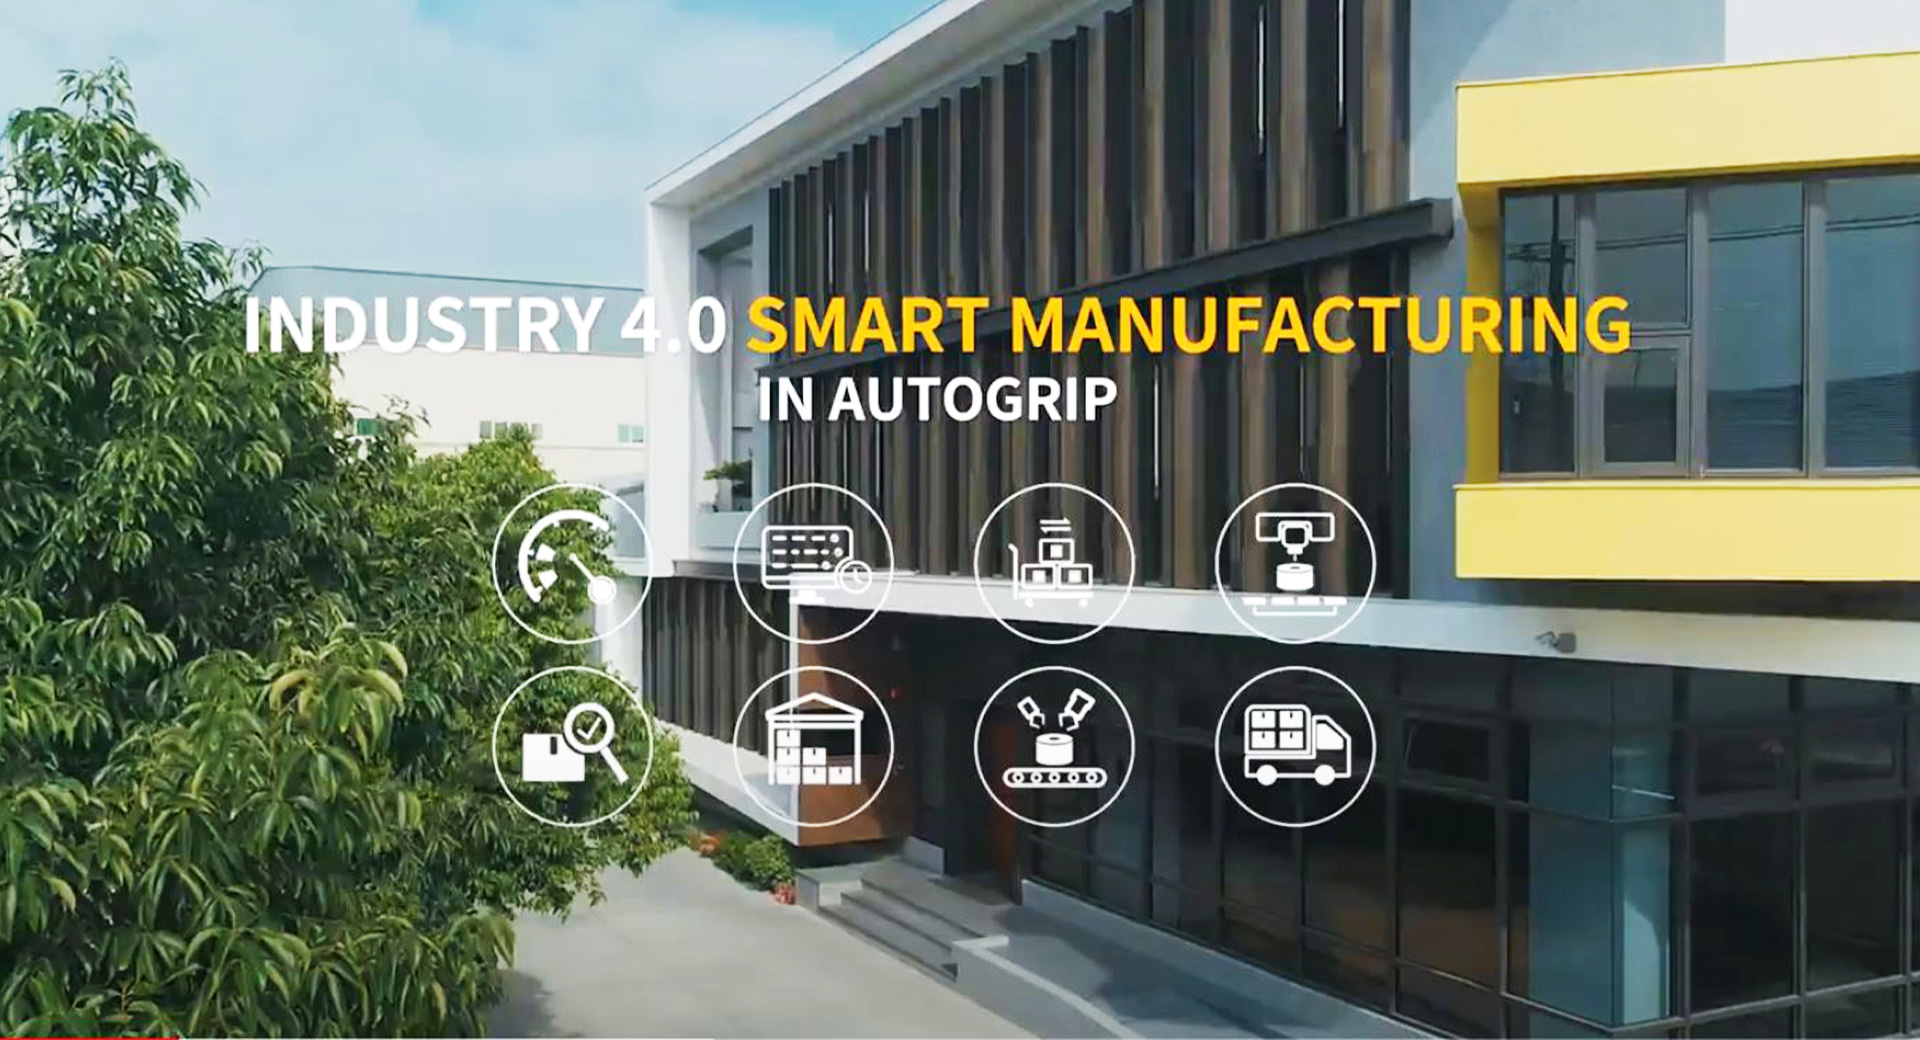 INDUSTRY 4.0 SMART MANUFACTURING IN AUTO